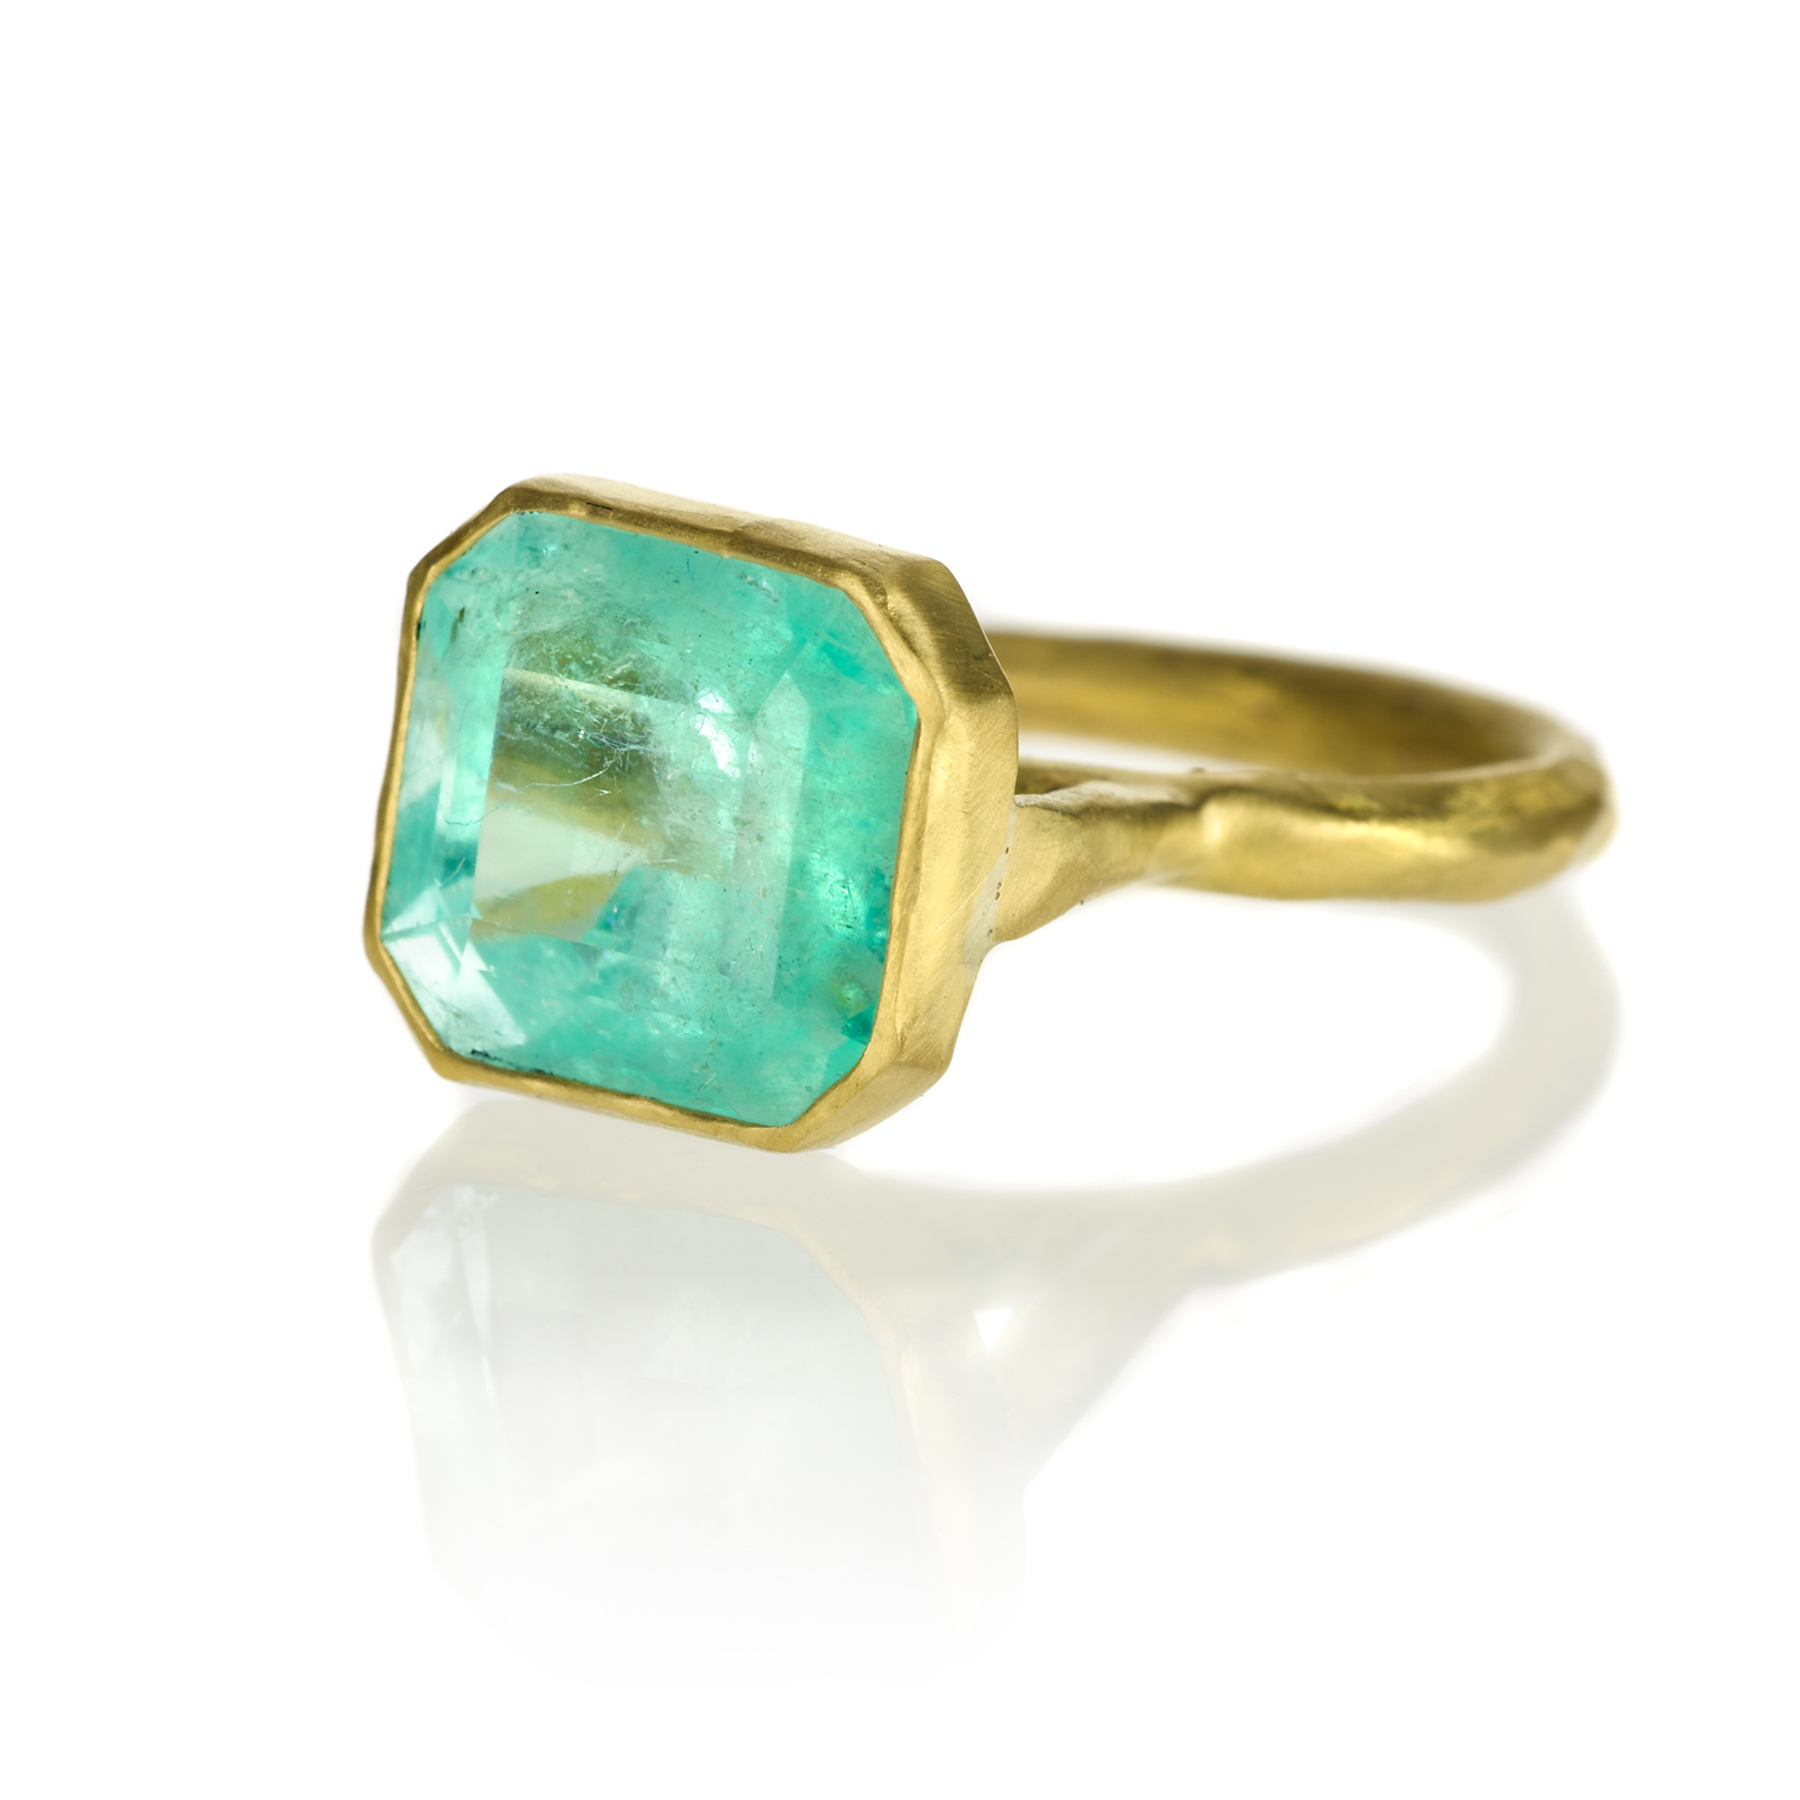  Give us this ring in 22k gold with an 8.25 ct. emerald,&nbsp;$6,700. Just give it to us. 